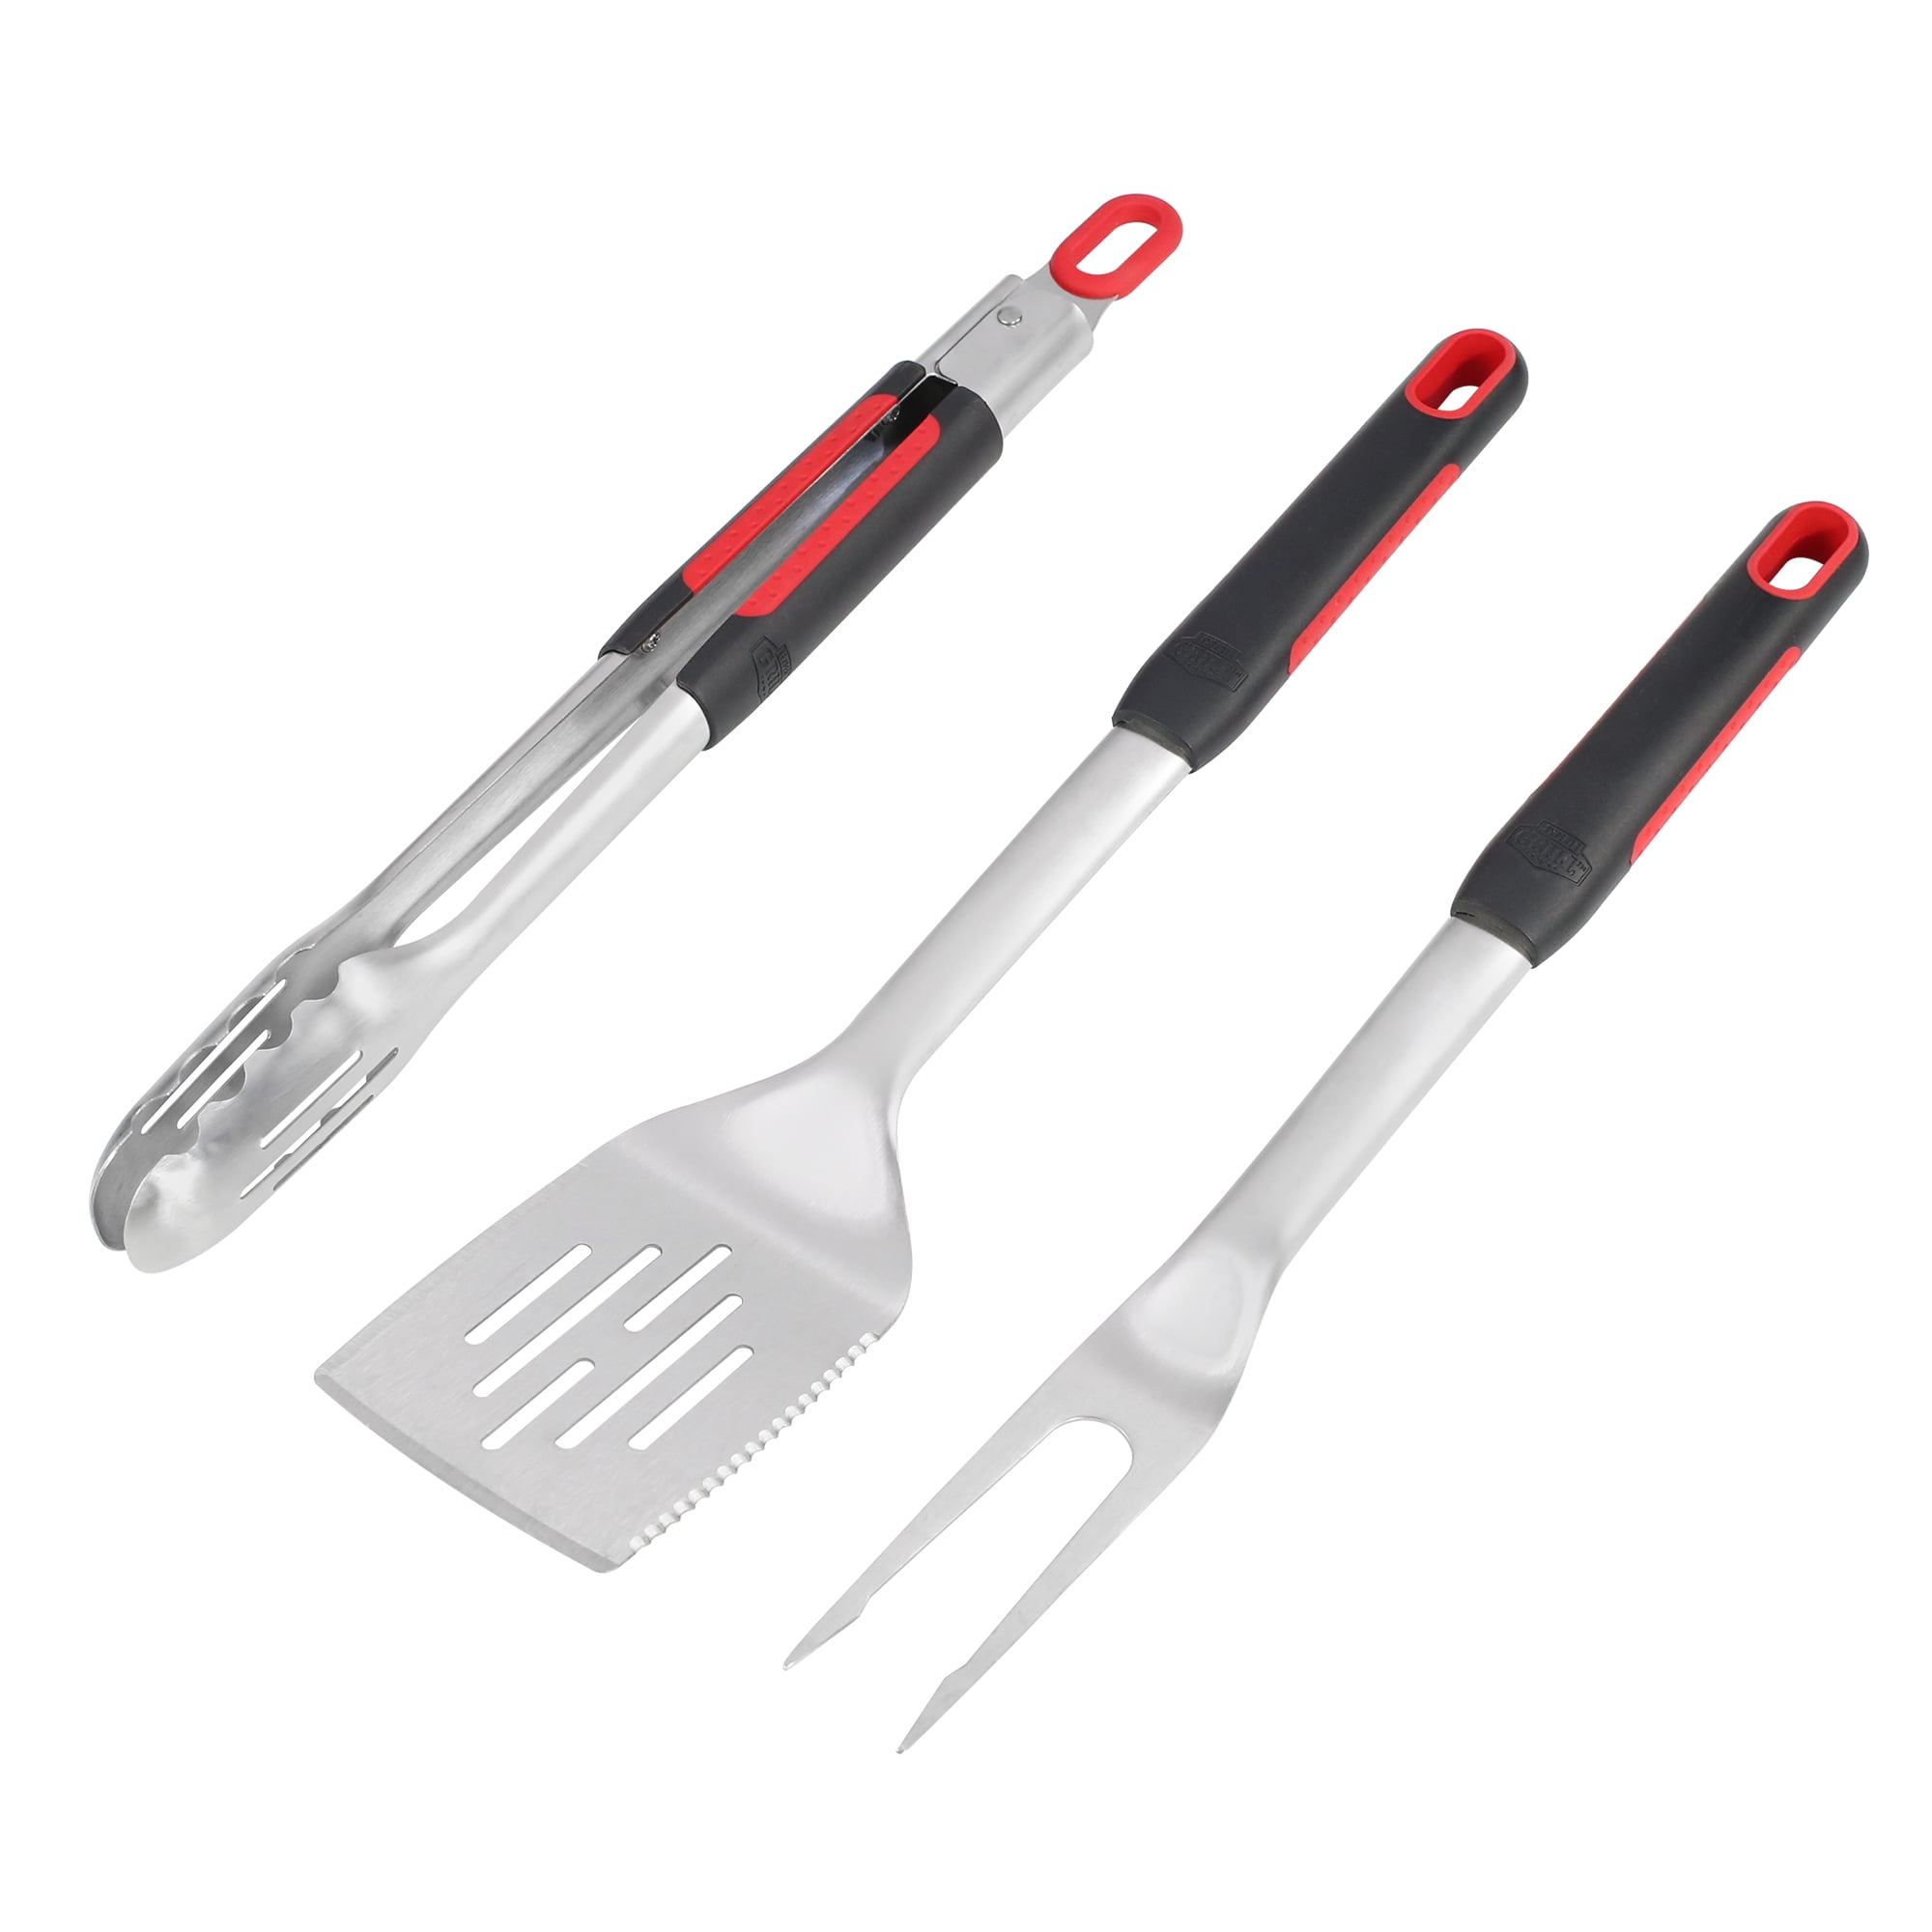 VNIMTI BBQ Grill Accessories, 3PC Grill Tools Set, Grill Tongs, Spatula &  Fork, Grilling Accessories For Outdoor Grill, Stainless Steel Barbeque  Accessories, Ideal Grill Gifts For Men